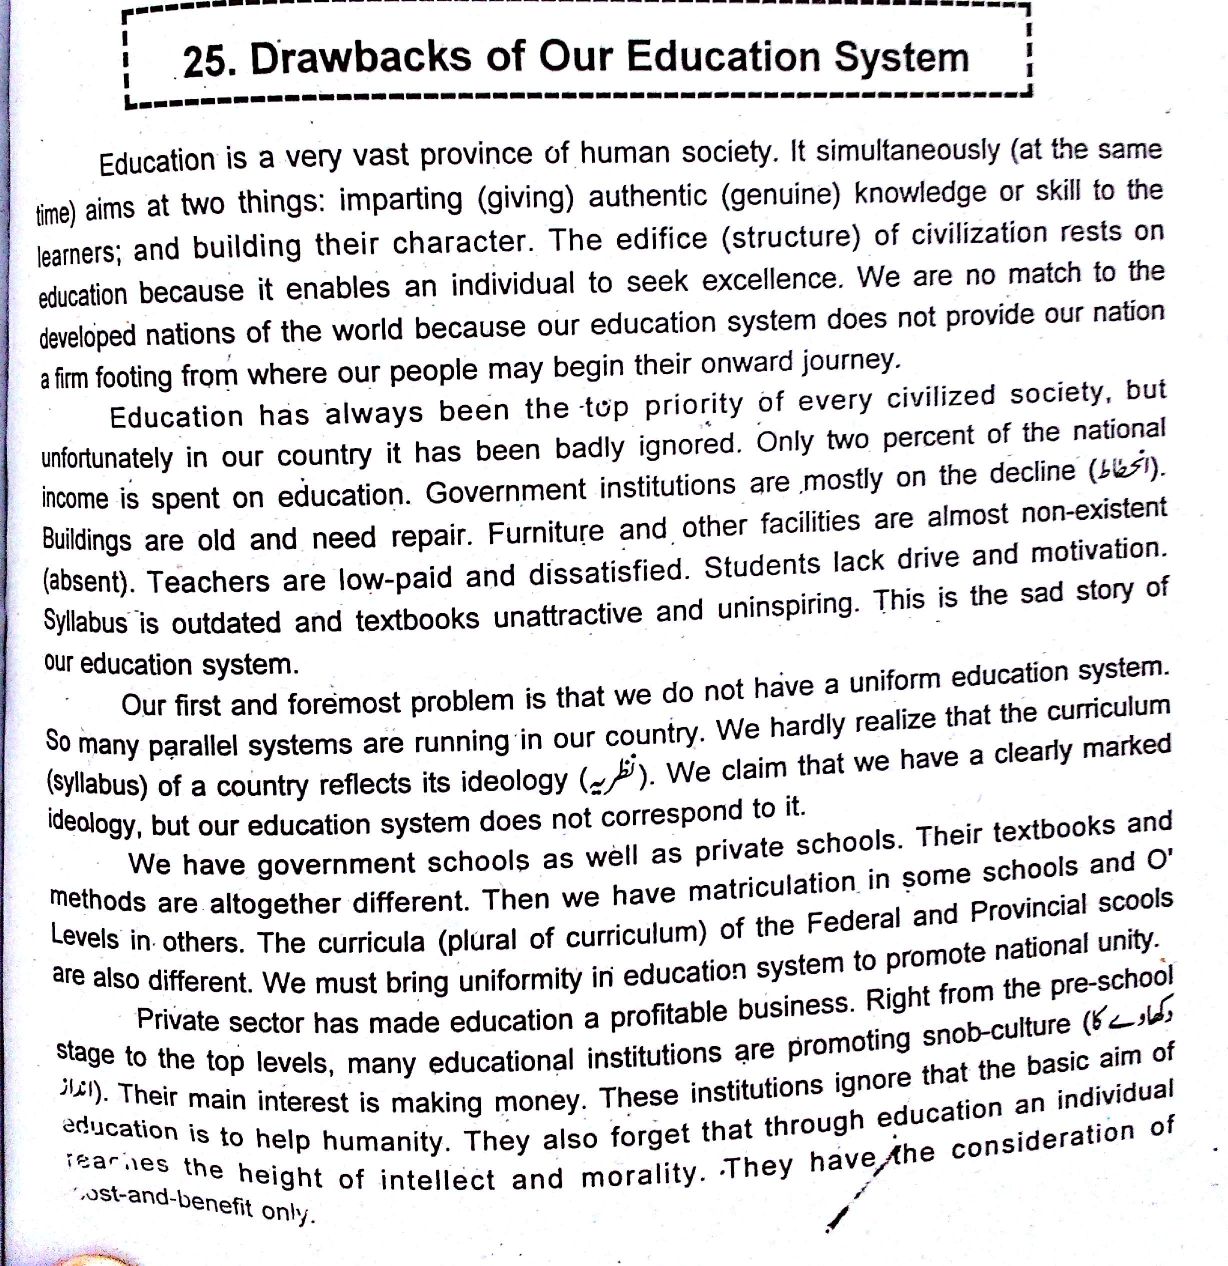 Essay on education system in india or abroad